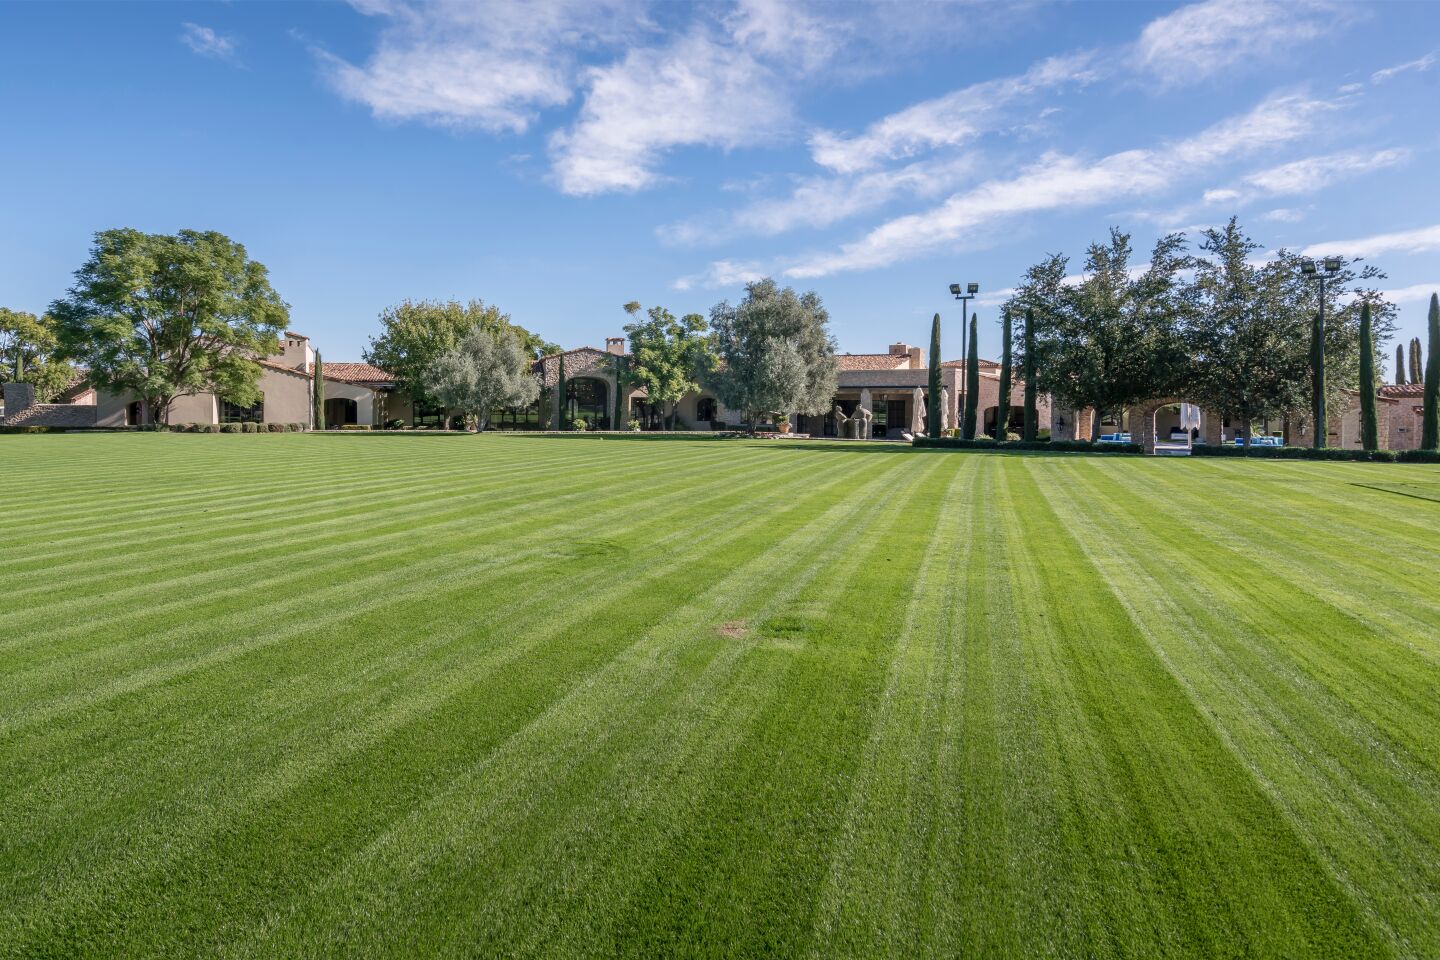 The expansive lawn